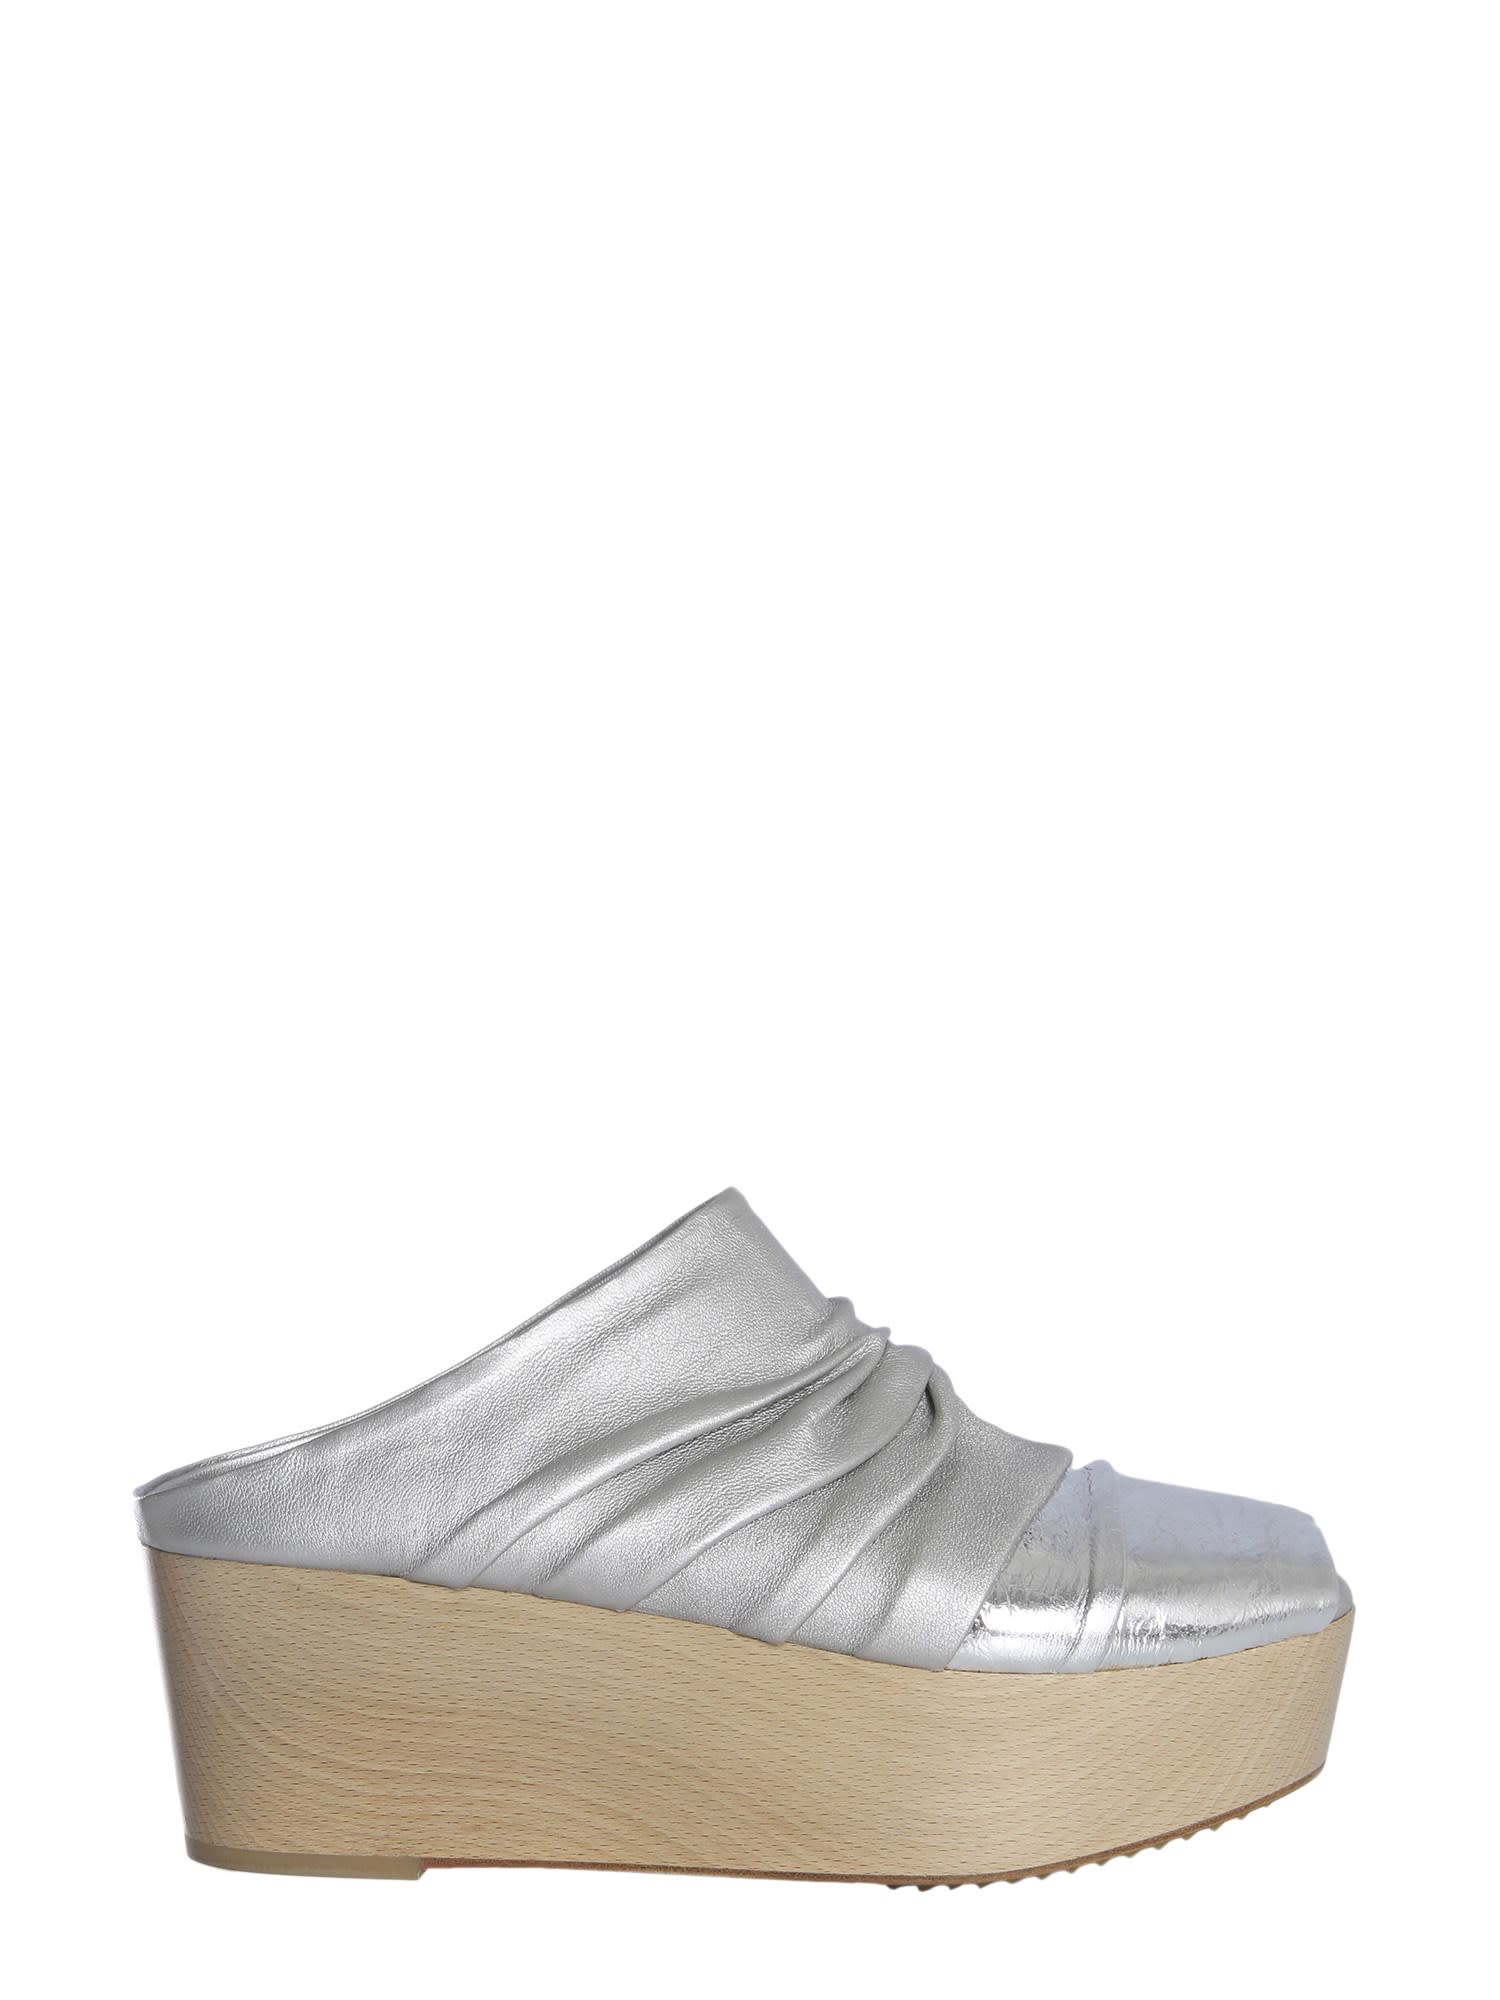 Buy Rick Owens Draped Leather Mules online, shop Rick Owens shoes with free shipping